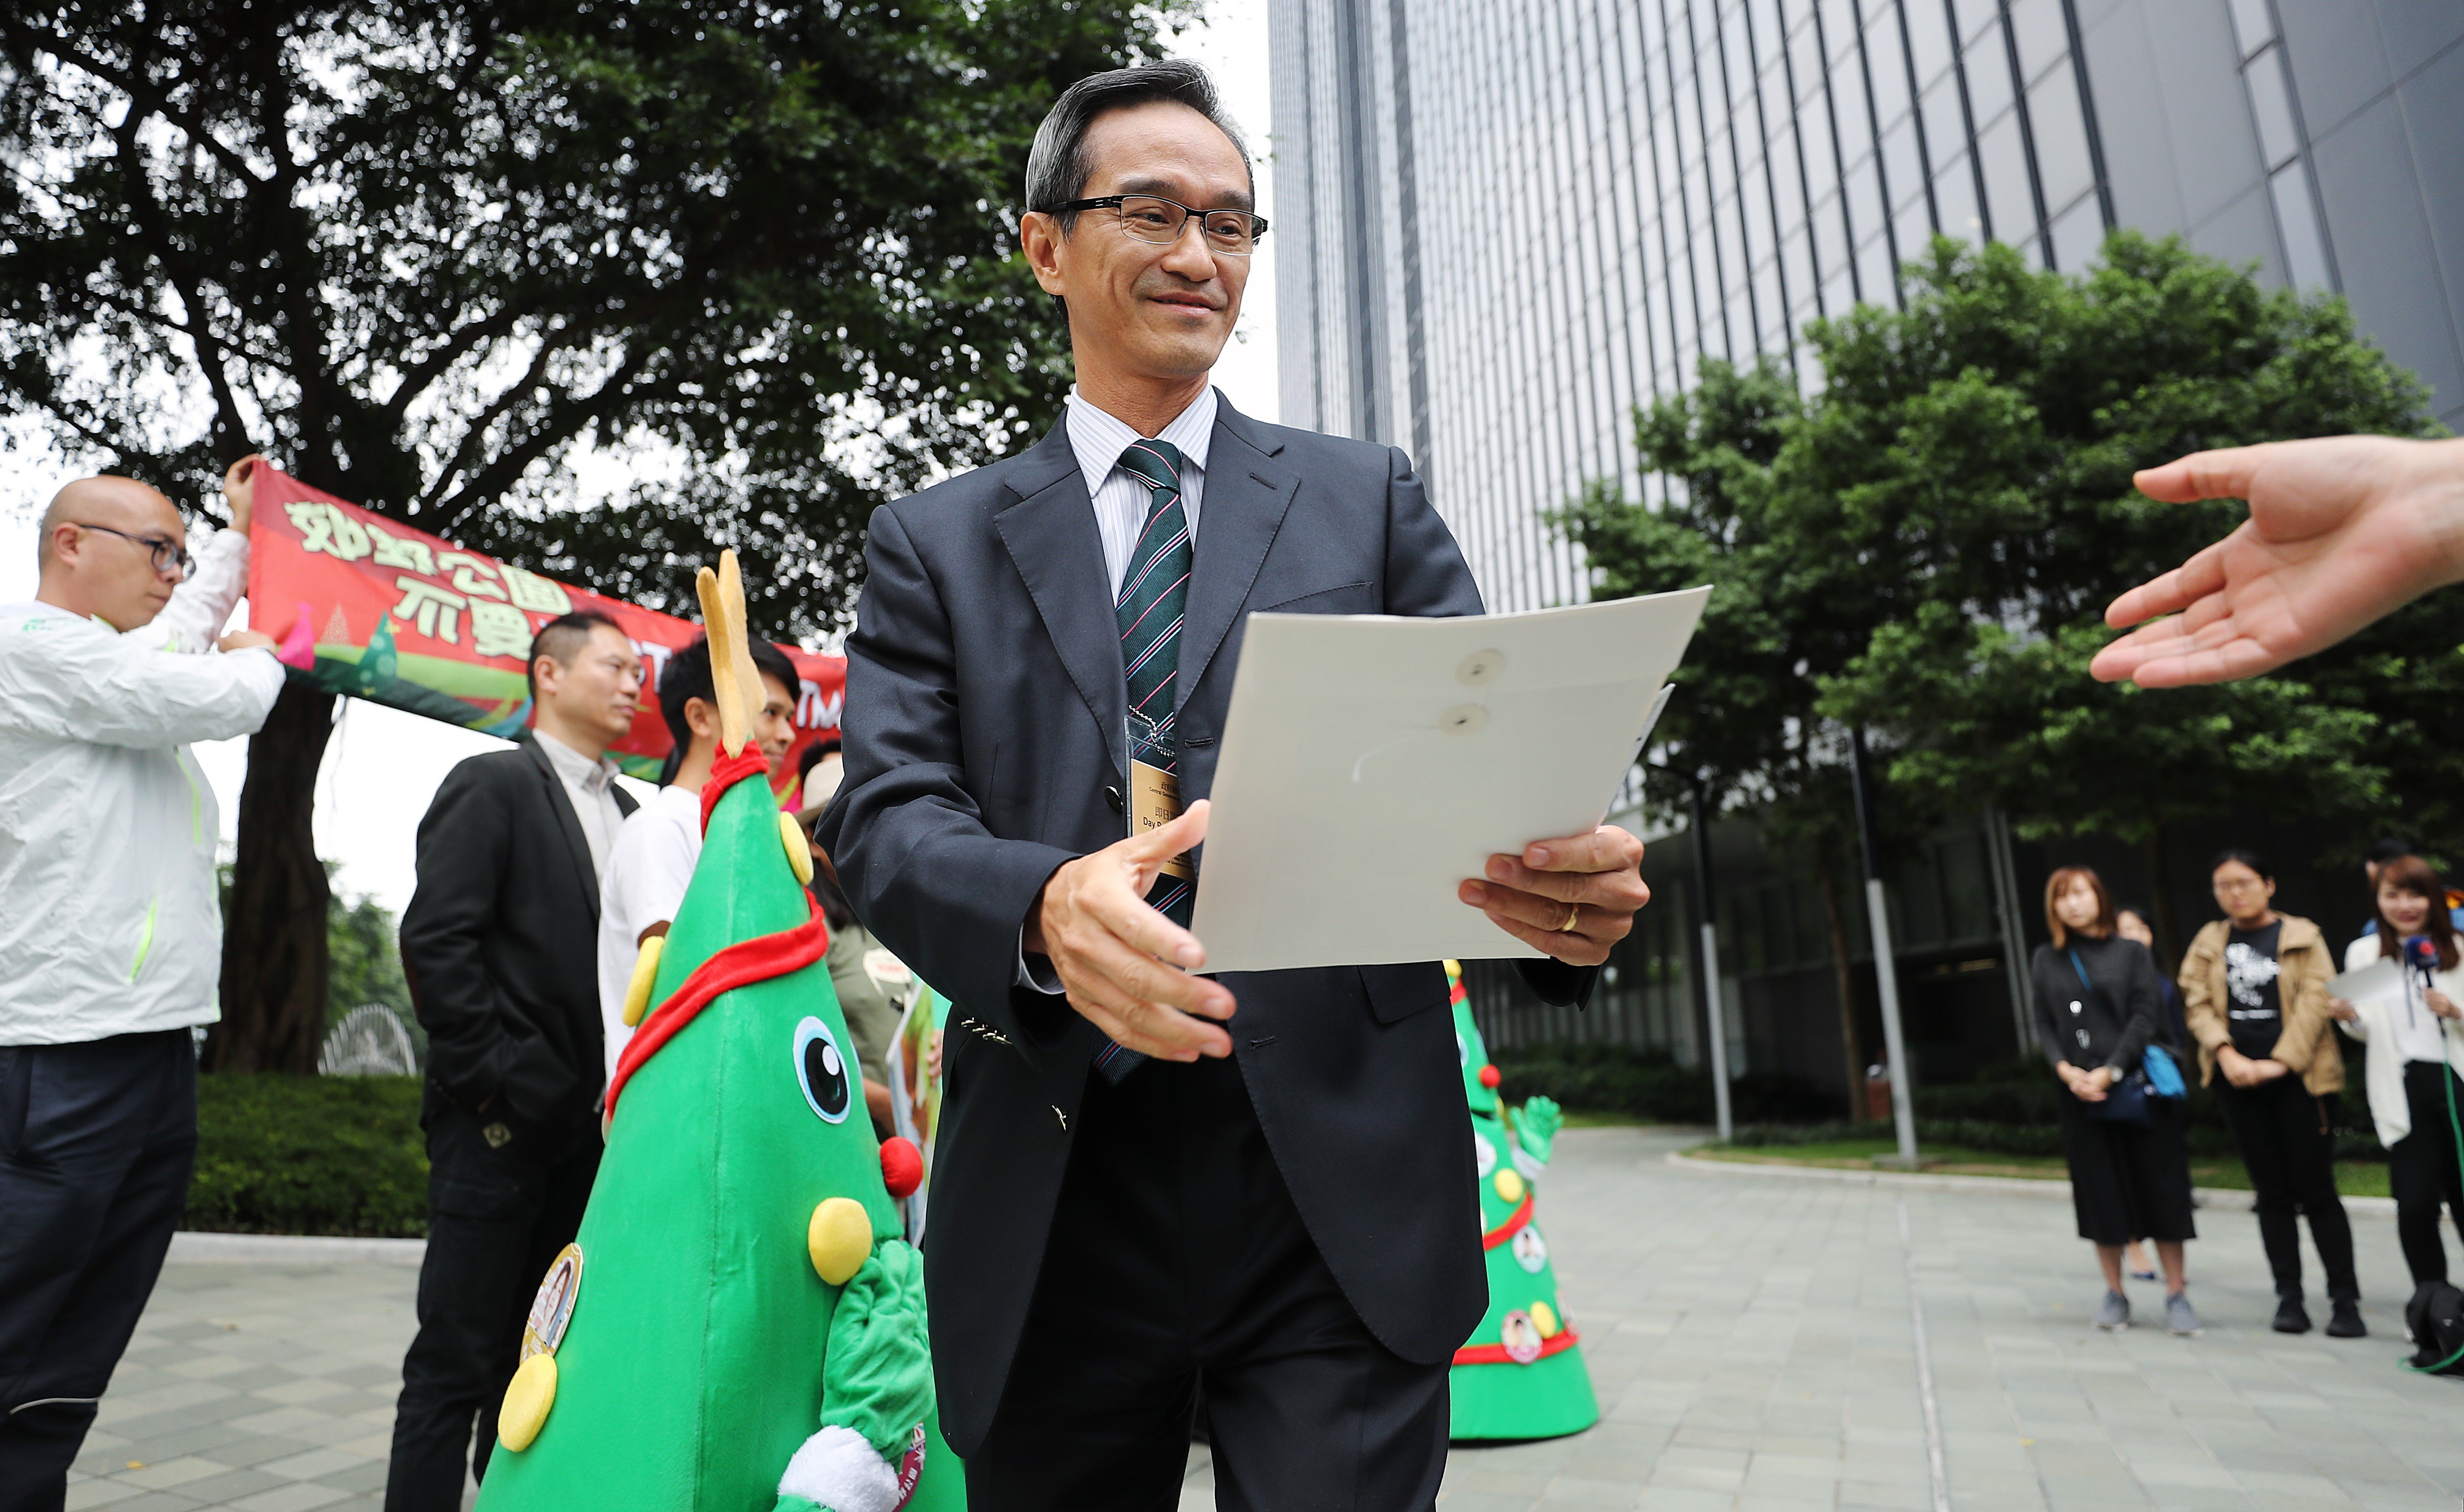 The chairman of the Task Force on Land Supply, Stanley Wong Yuen-fai, receives petition letters from Greenpeace campaigners urging the task force to safeguard country parks, outside the Hong Kong government headquarters, in Admiralty last December 5. Photo: Winson Wong